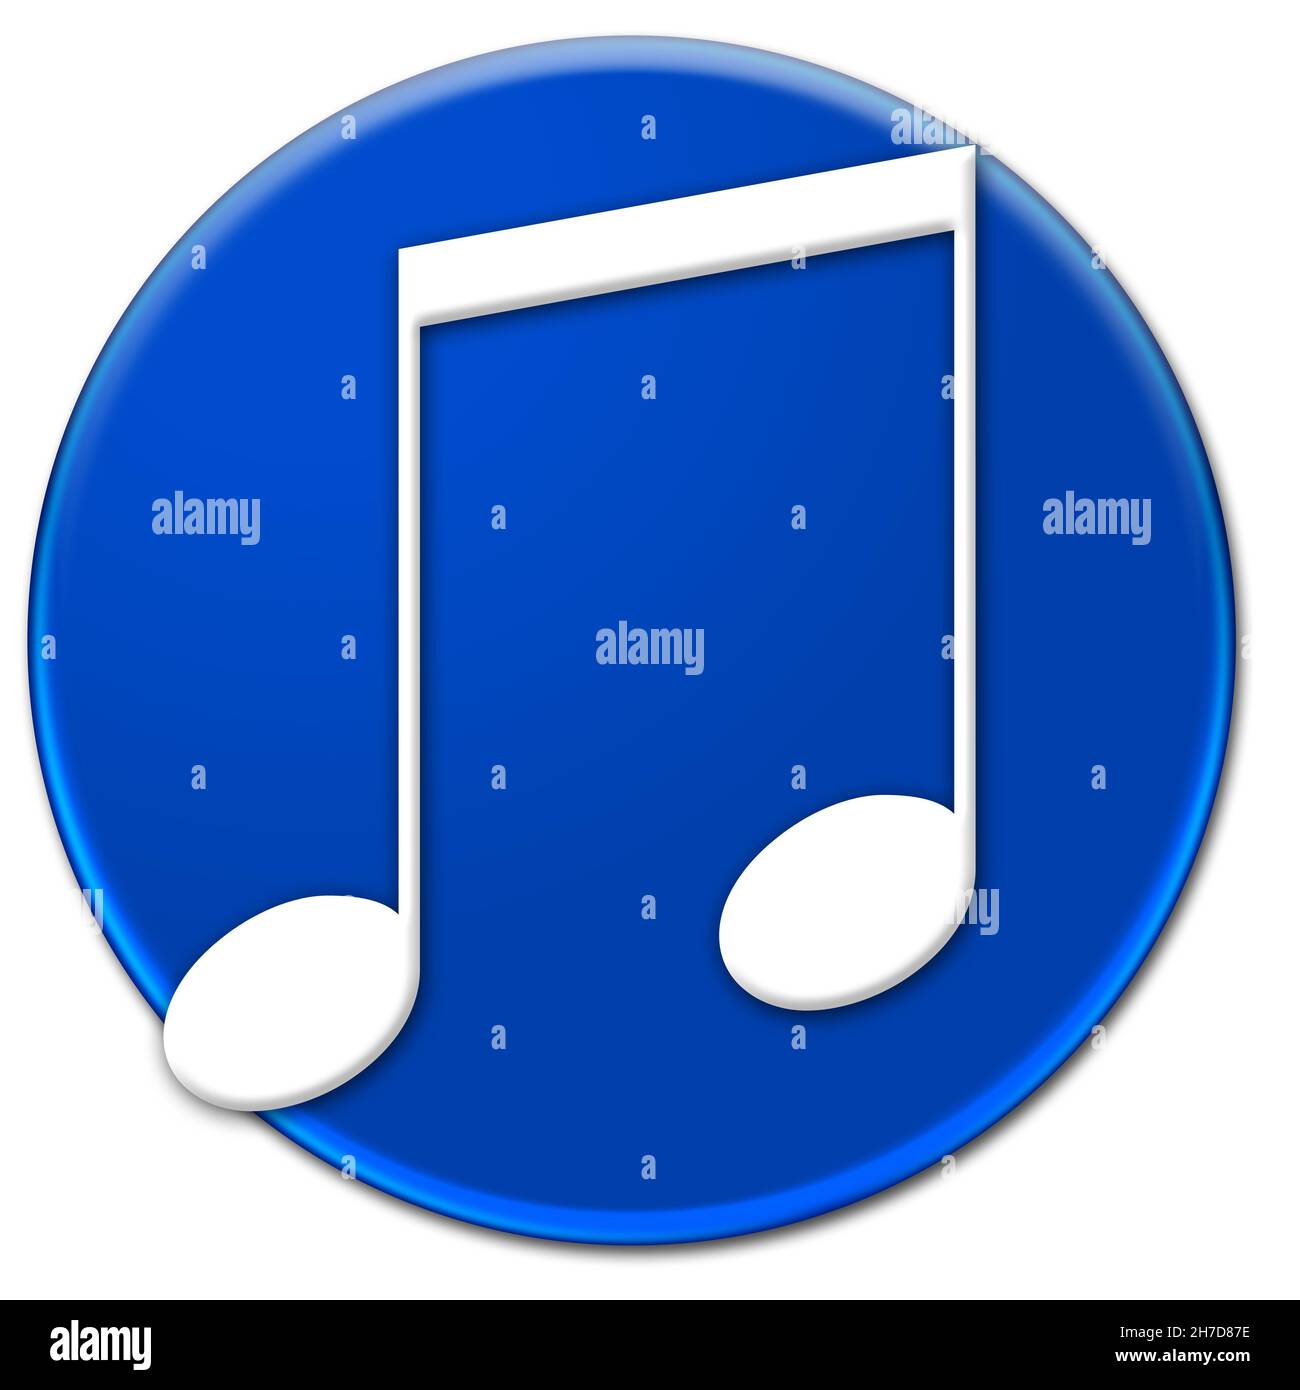 Two music notes combined on a blue glassy button isolated over white background Stock Photo